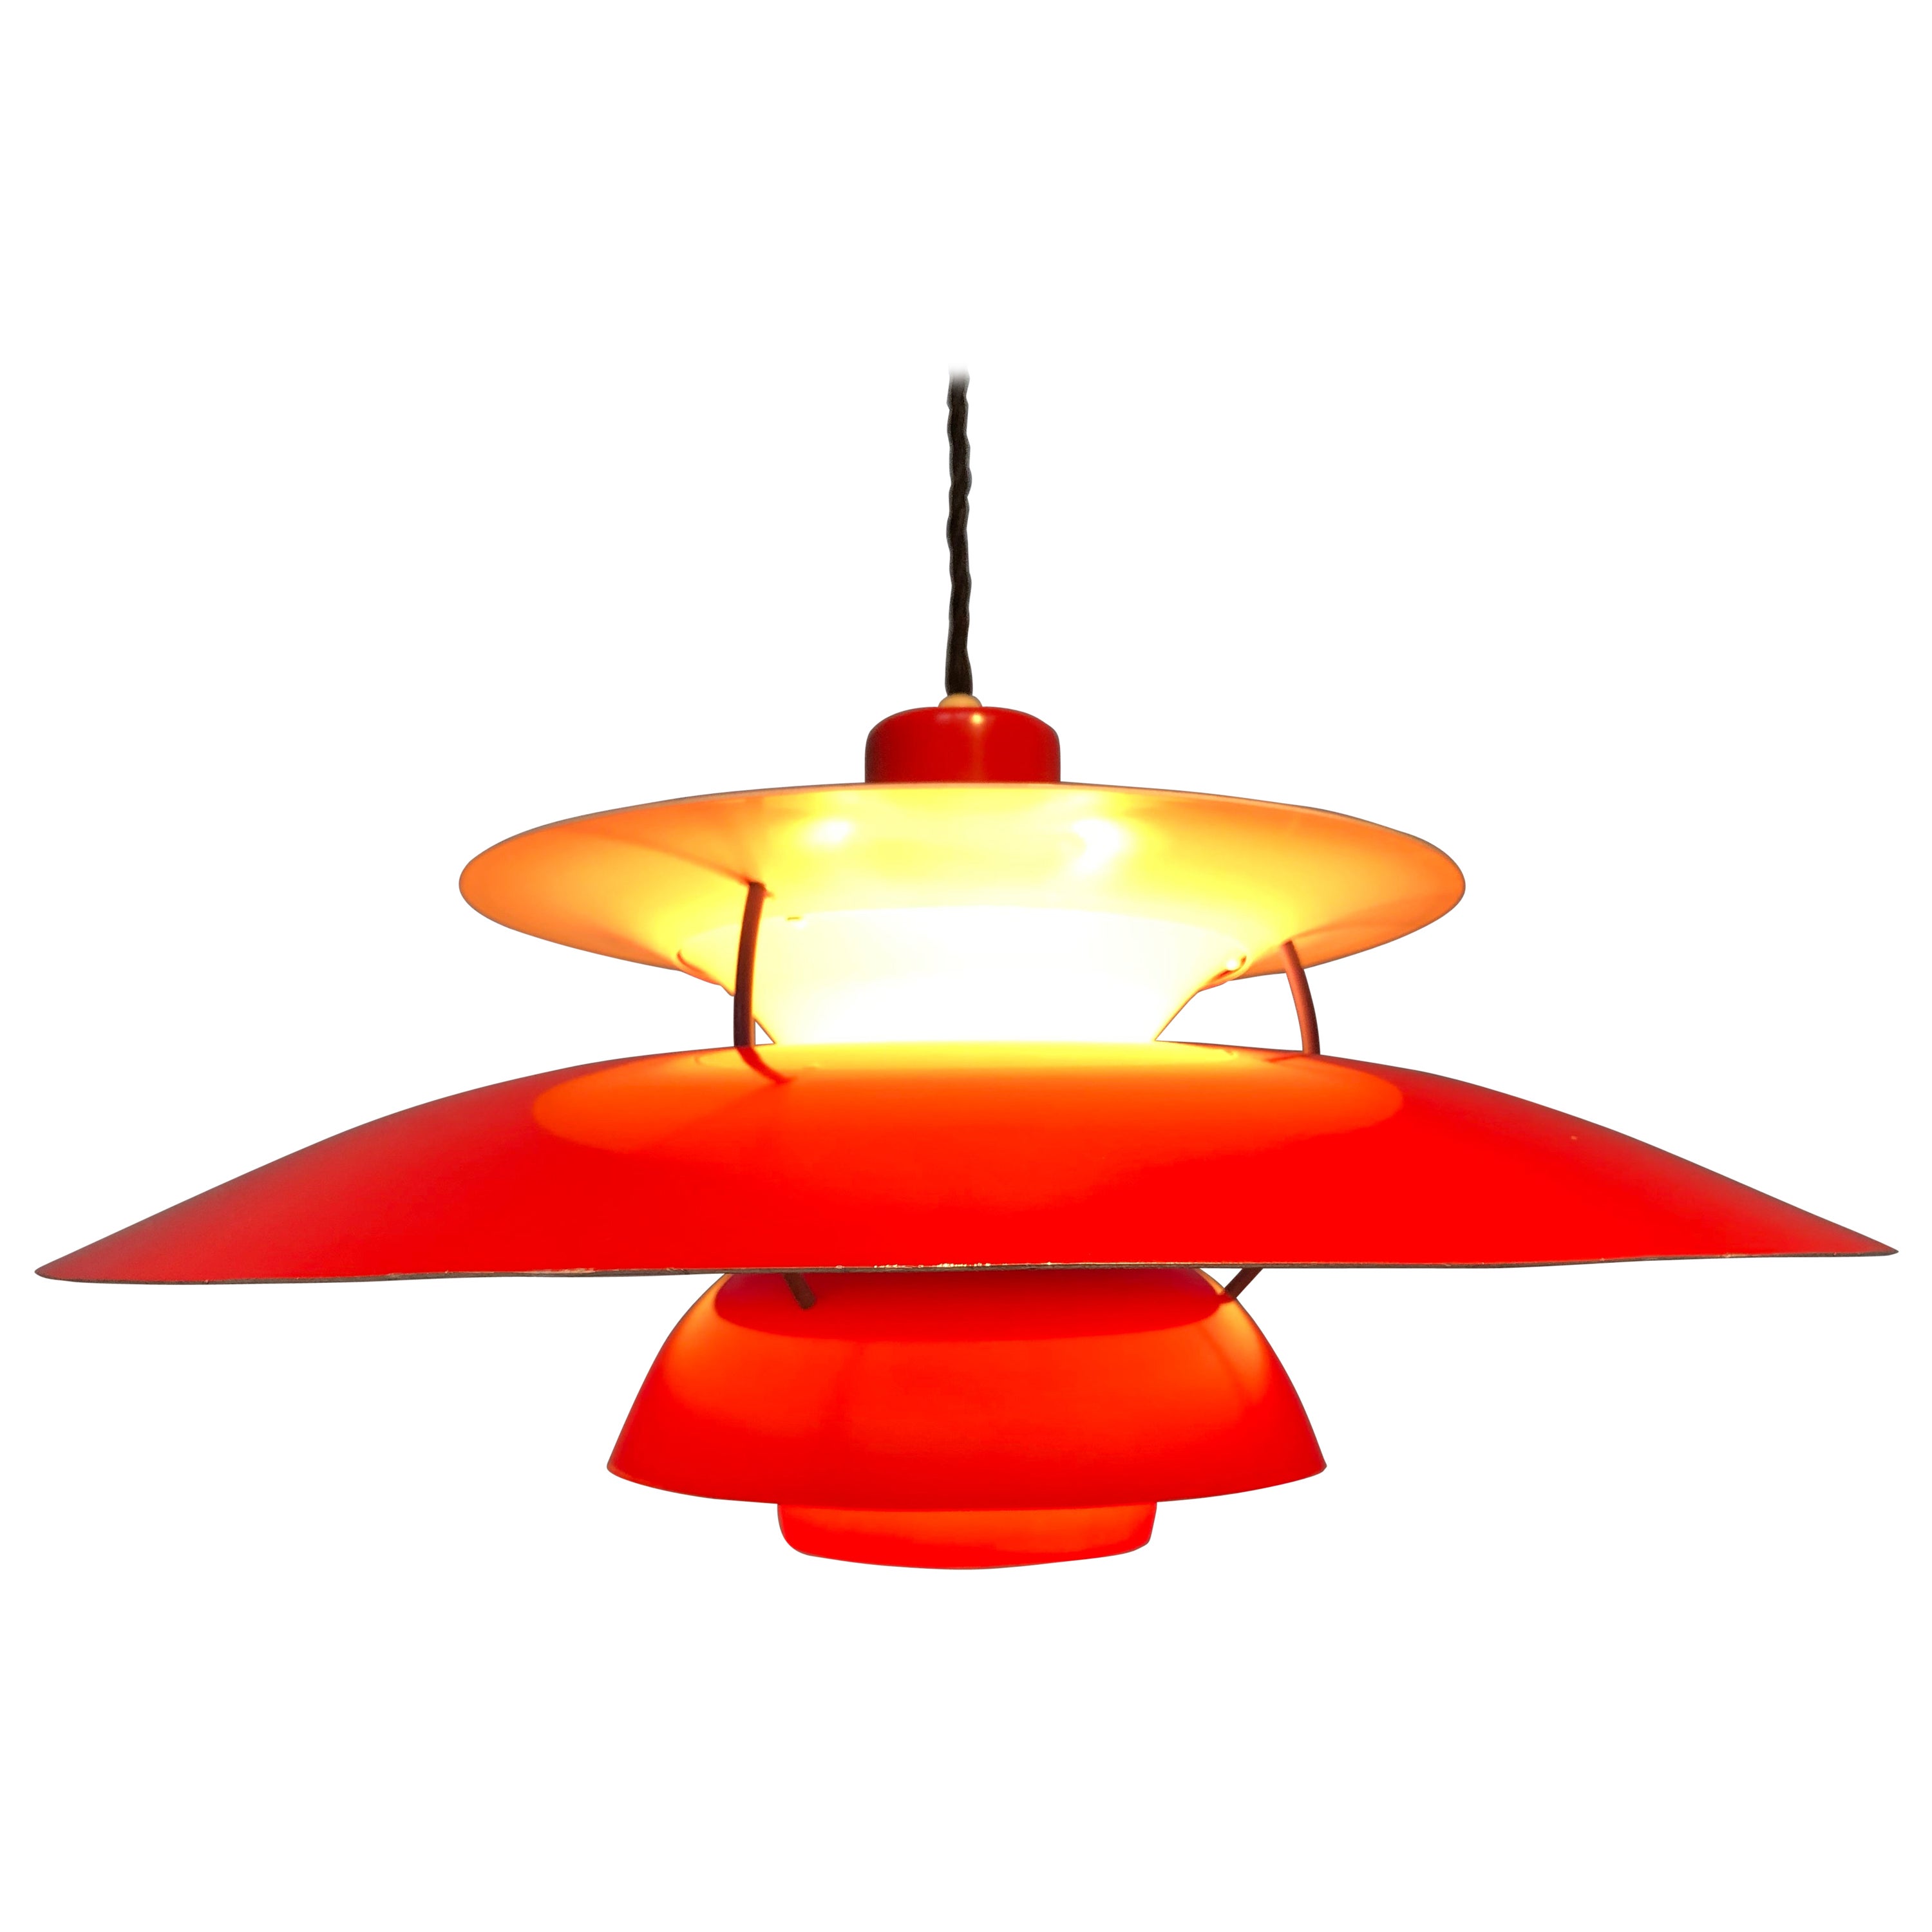 Iconic Rare 1st Edition Poul Henningsen PH 5 Chandelier Pendant Lamp from 1959 For Sale